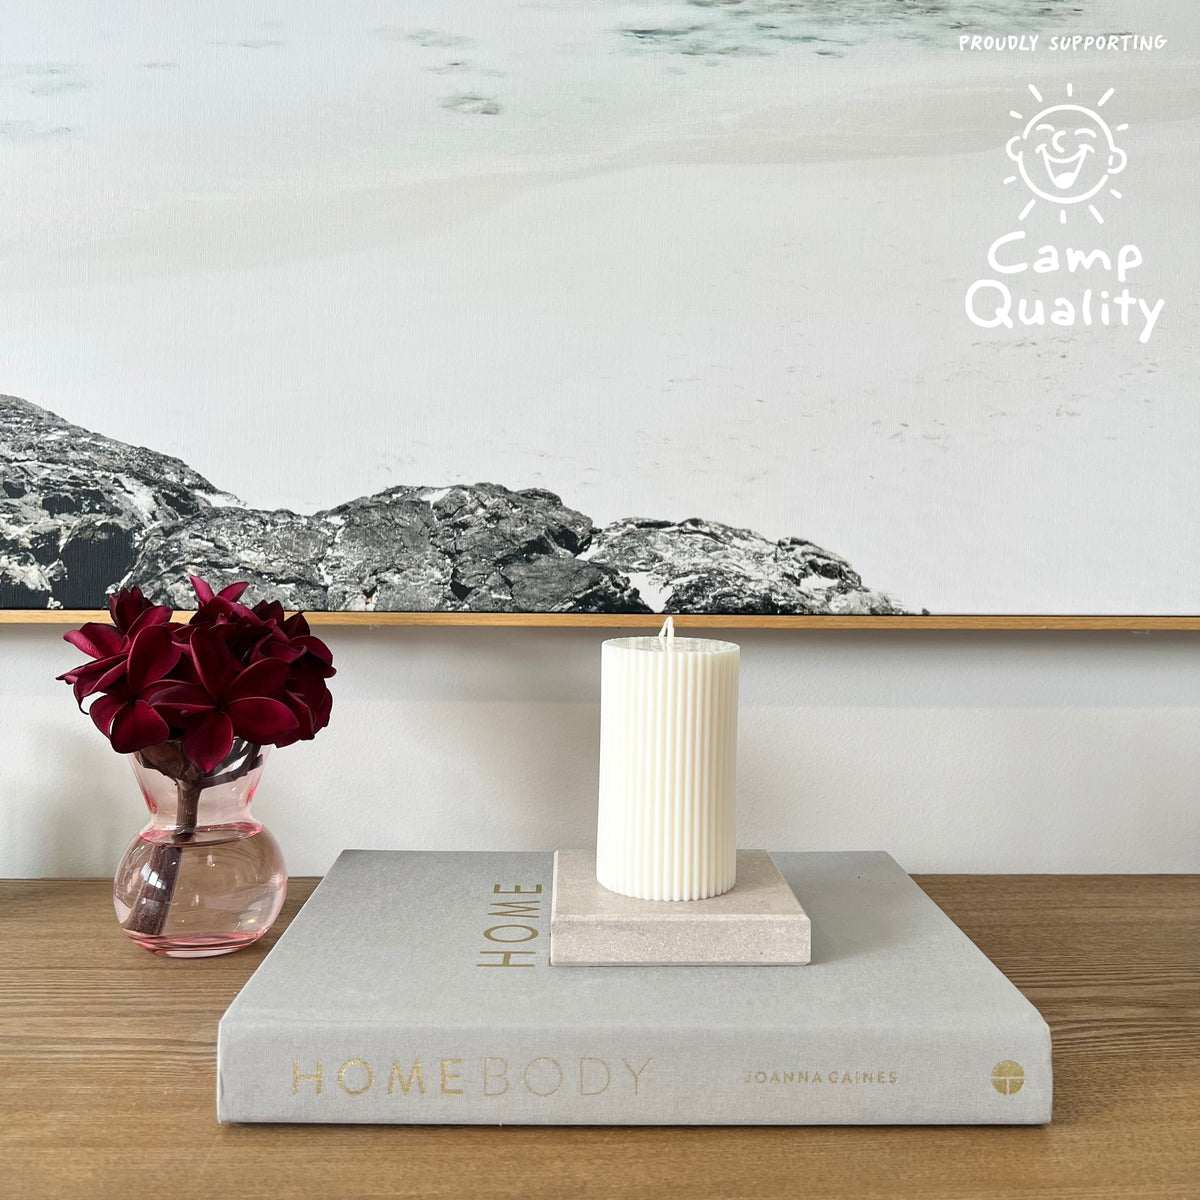 Square Candle Holder in Caesarstone Topus Concrete created by Aureliia Collection. Styled with Studio McKenna white pillar candle, upon Joanna Gaines book  next to vase with fresh flowers on timber table. This candle holder has full of movement, opacity, and depth of delicate mineral formations over a warm greige base, flushed with rugged patinas and pastel-pink undertones. The perfect home decor item.